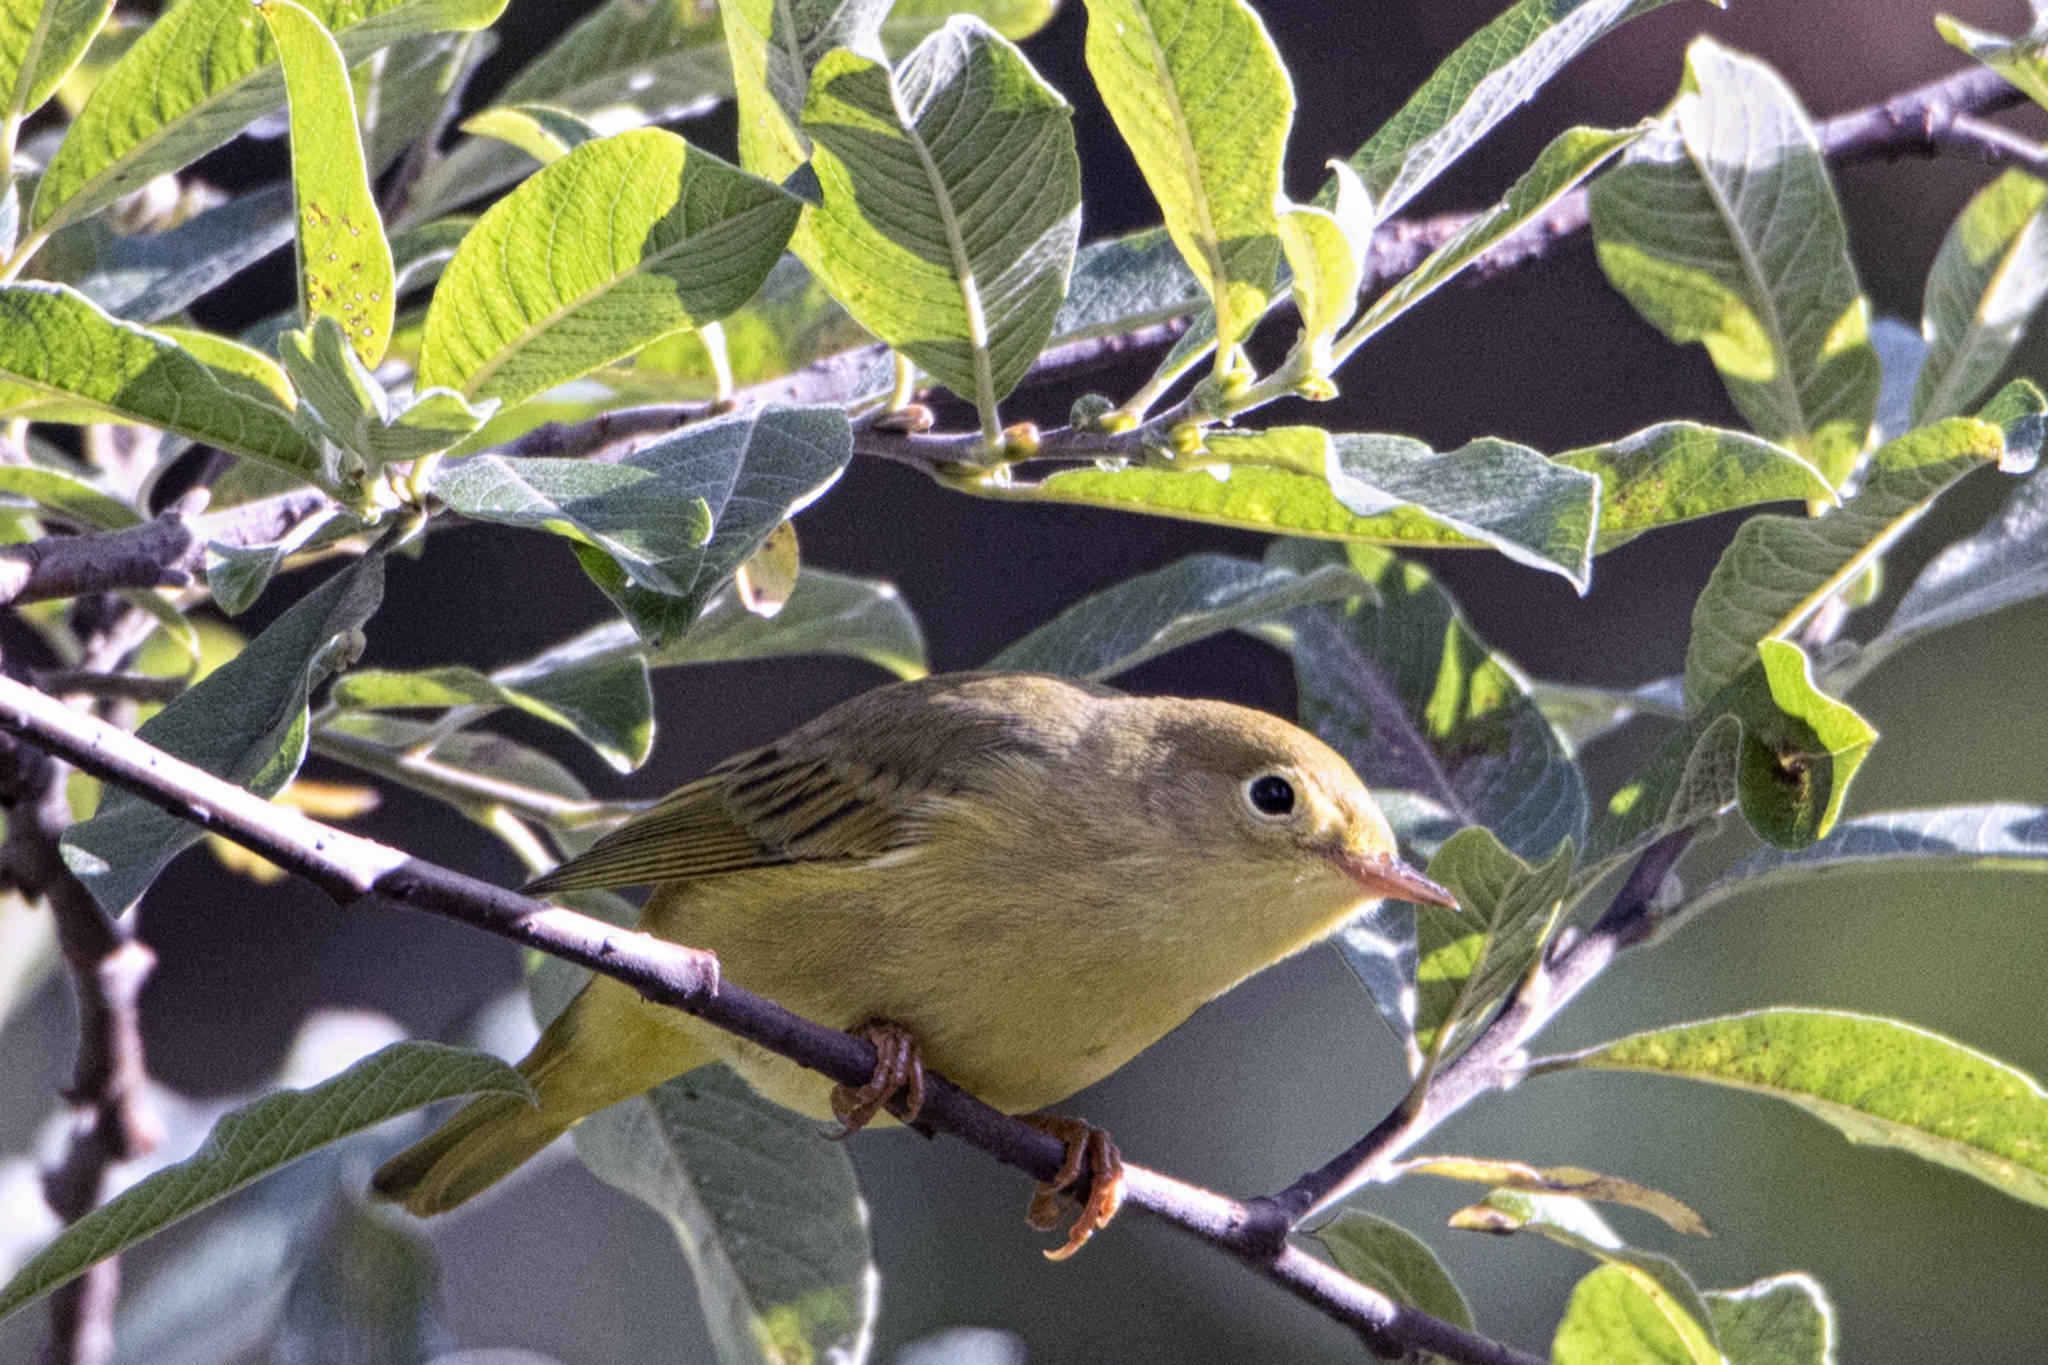 An immature yellow warbler perches by Steep Creek on Sept. 10, 2020. (Courtesy Photo / Kenneth Gill, gillfoto)